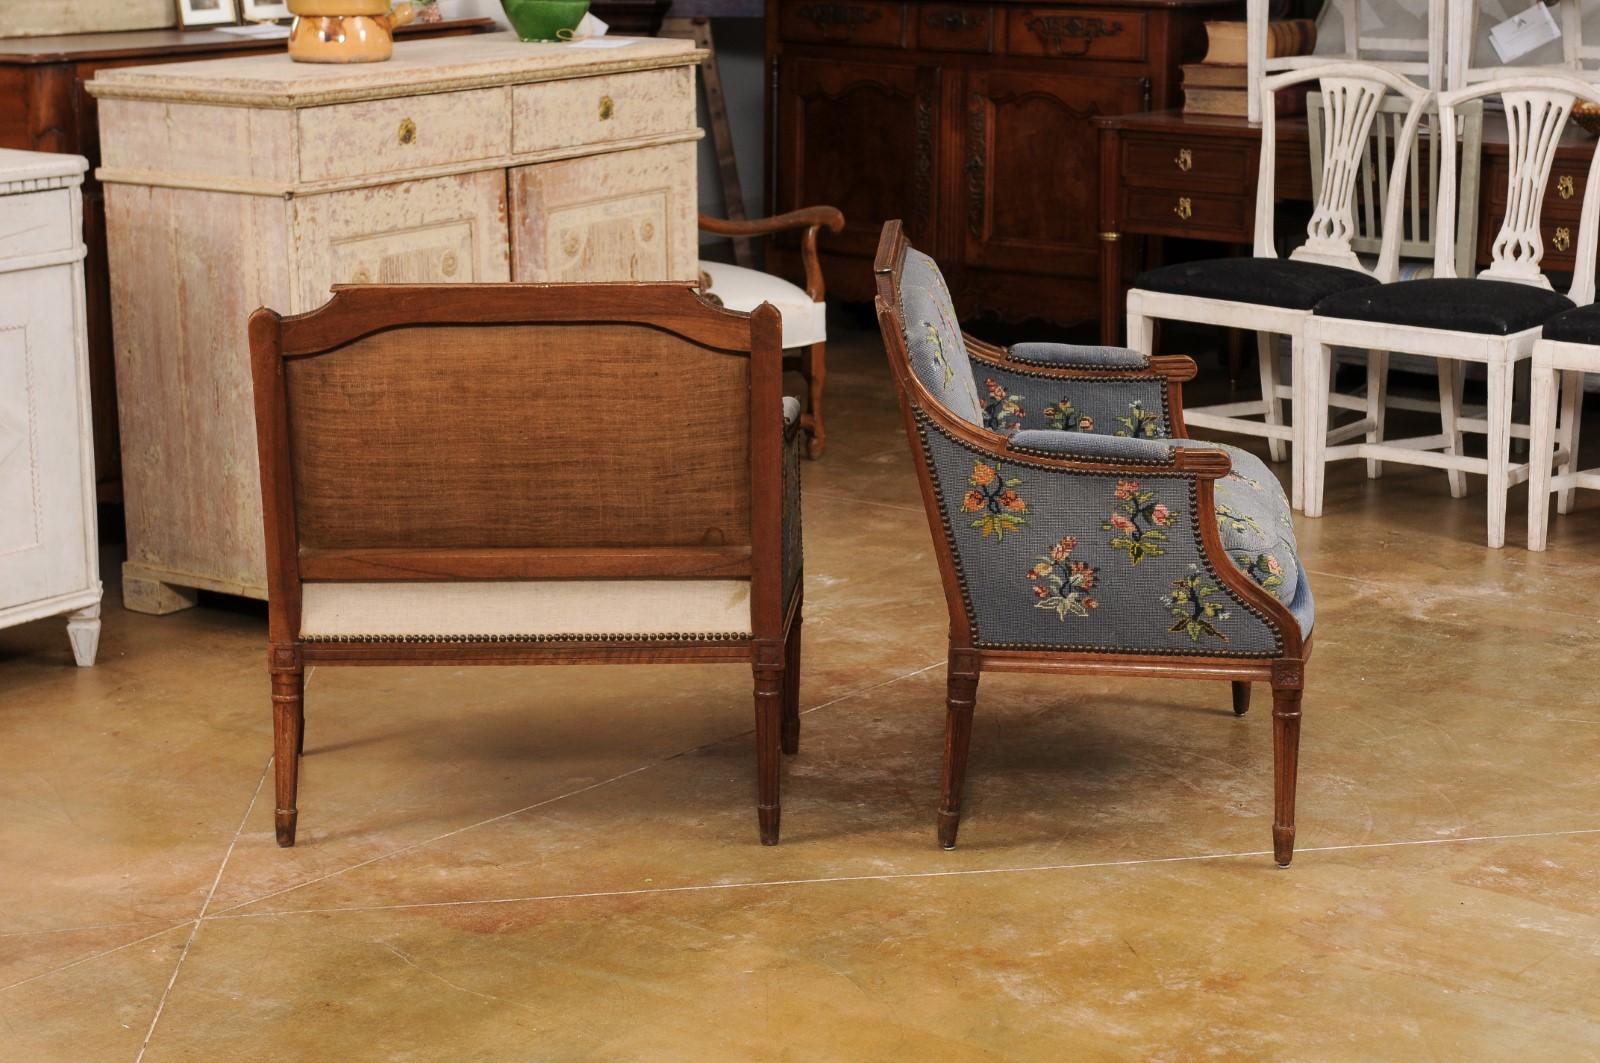 Pair of French Louis XVI Period 1790s Bergère Marquise Chairs with Upholstery For Sale 4